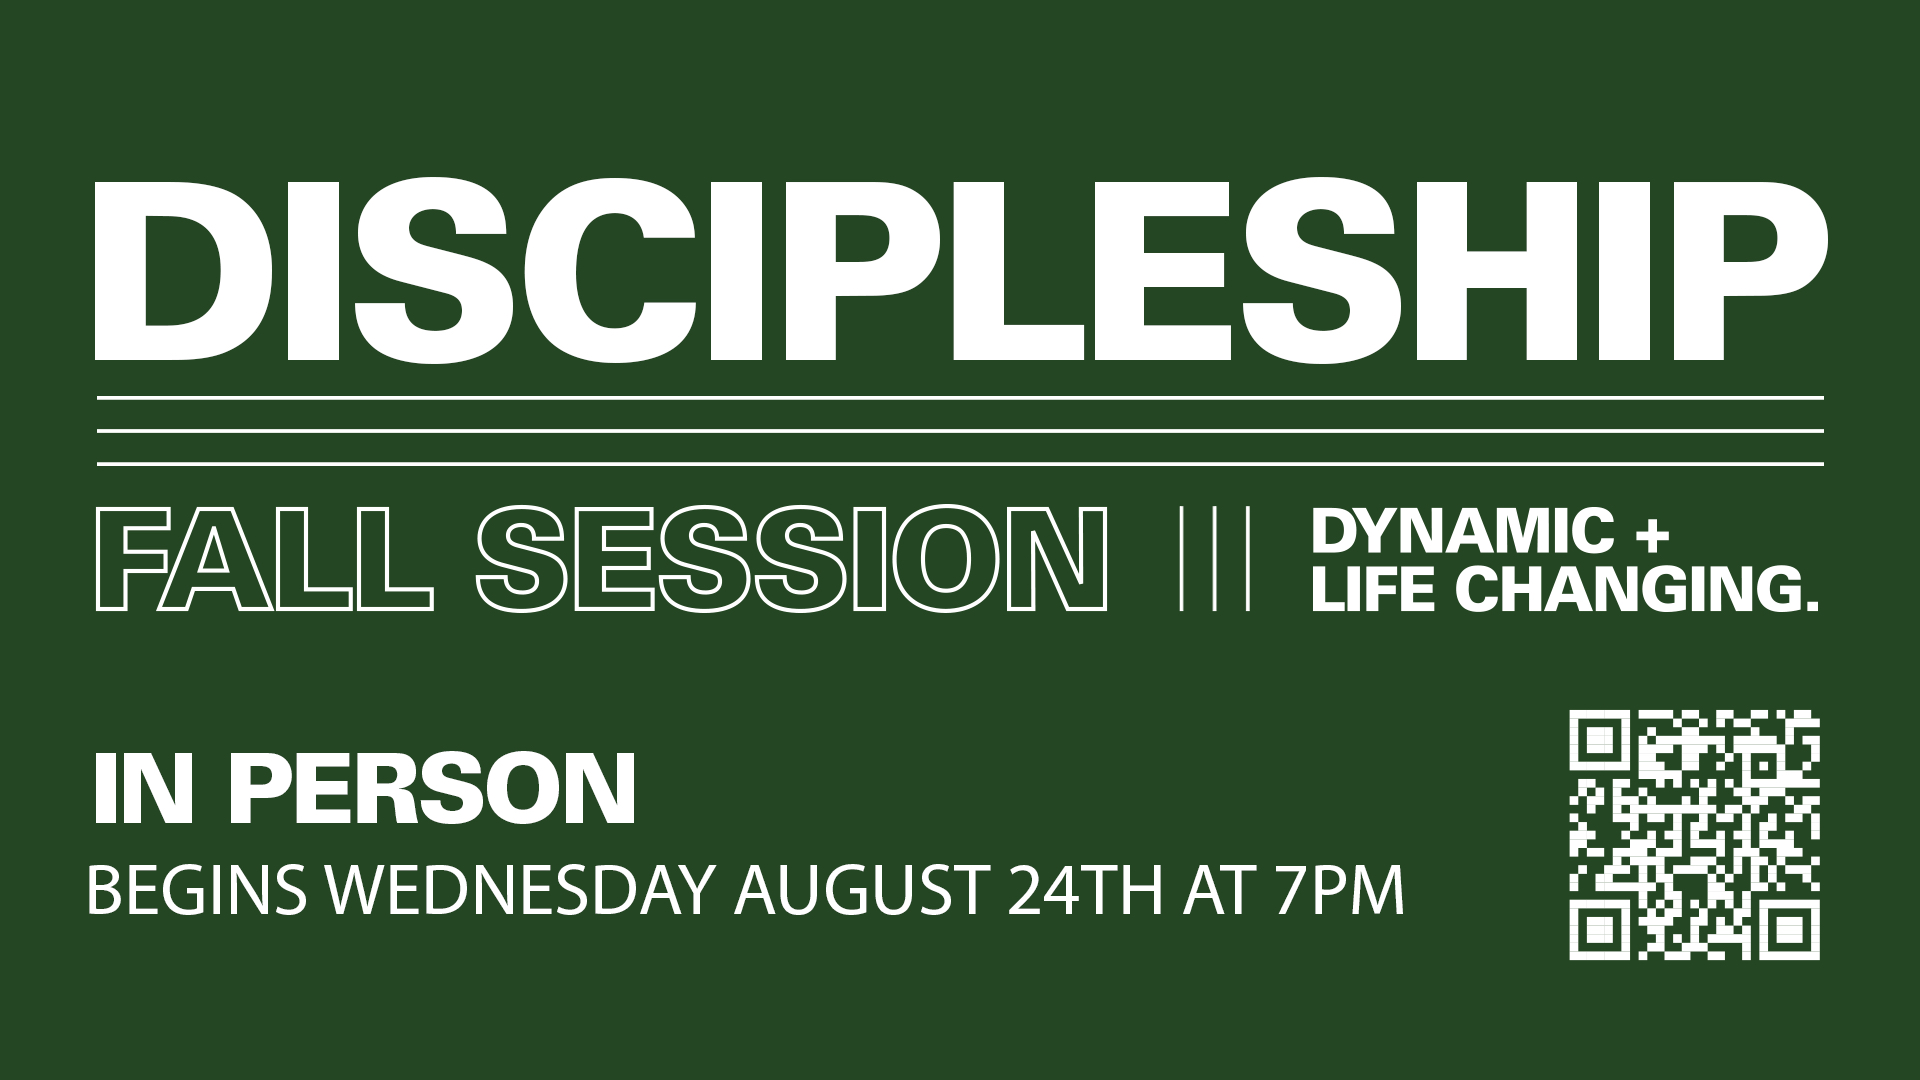 School of Discipleship - Fall Session at the Midtown campus